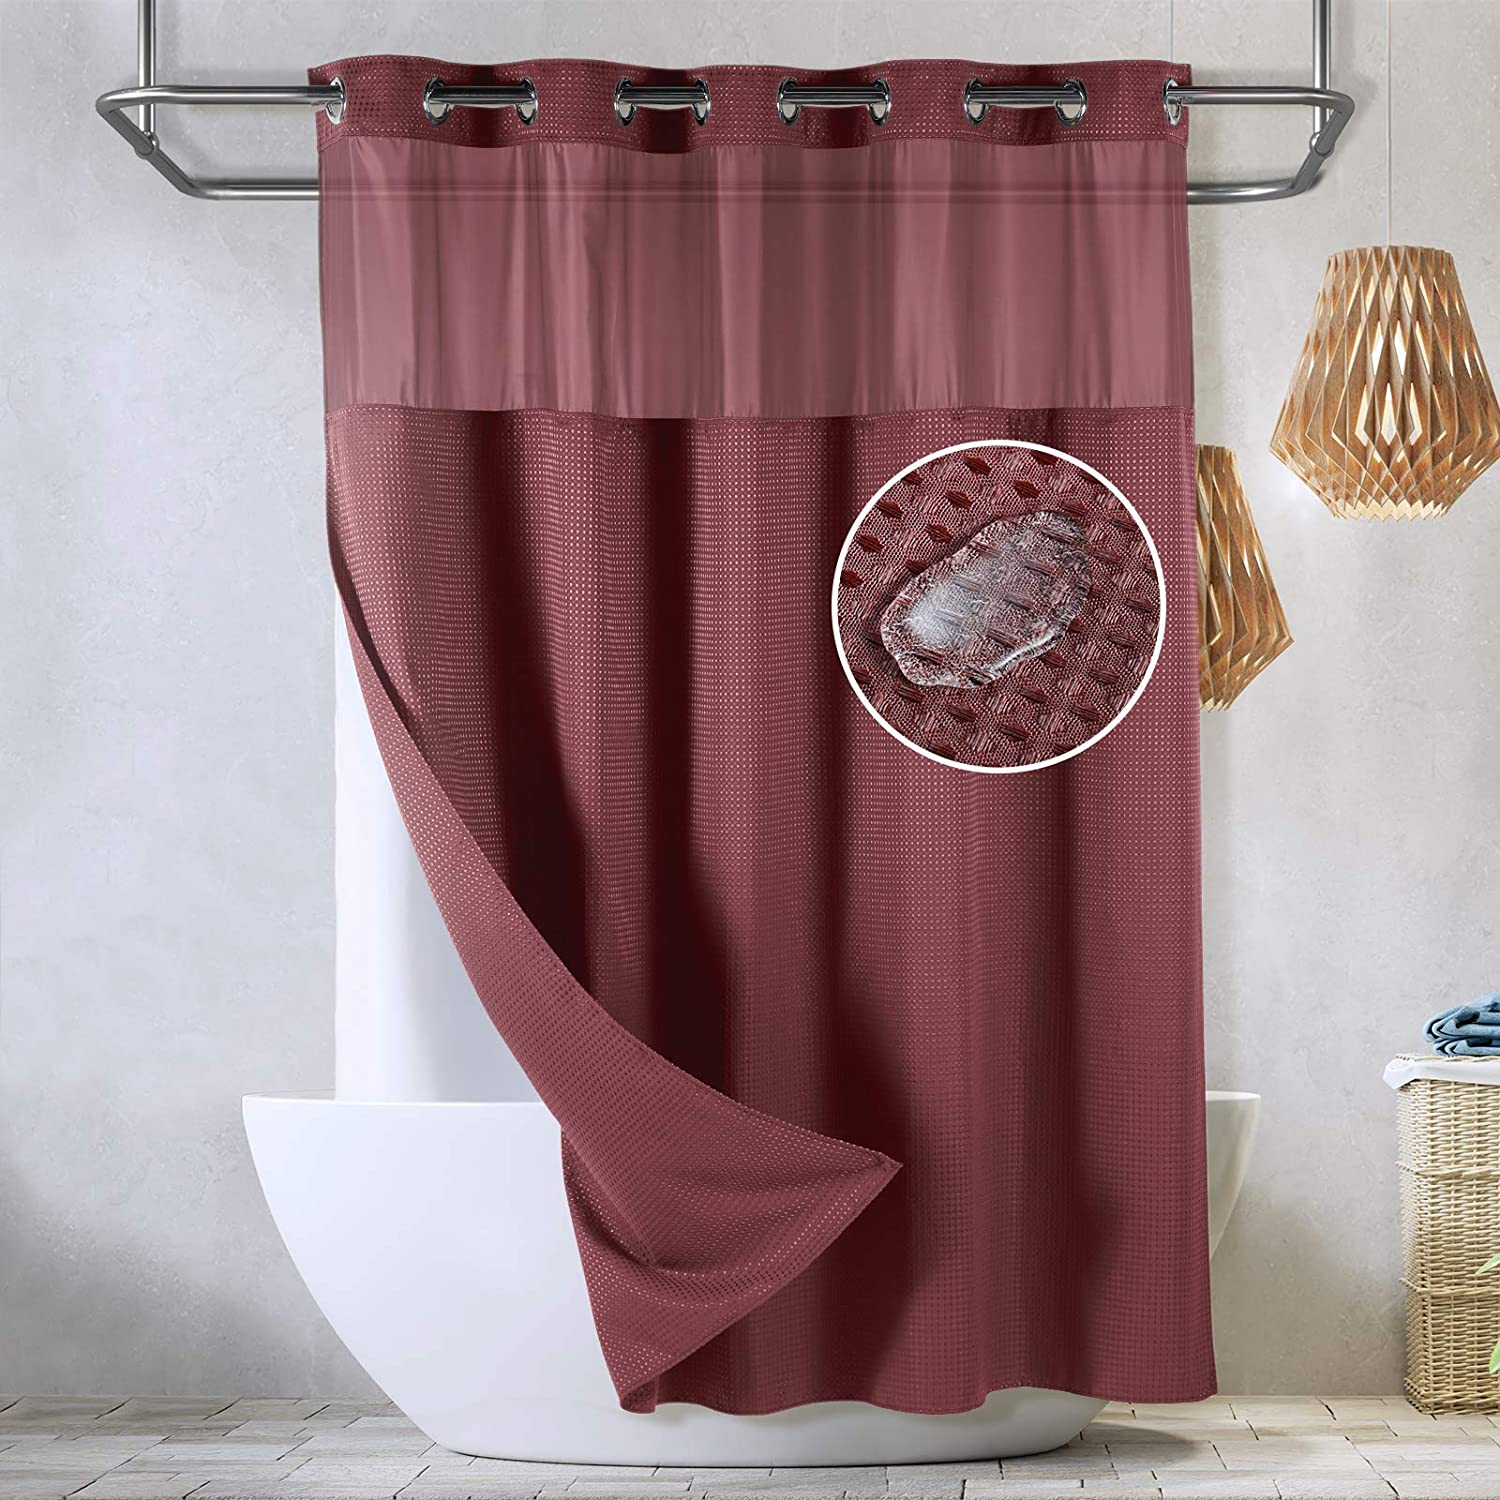 Lagute SnapHook Hook Free Waffle Fabric Shower Curtain with Snap